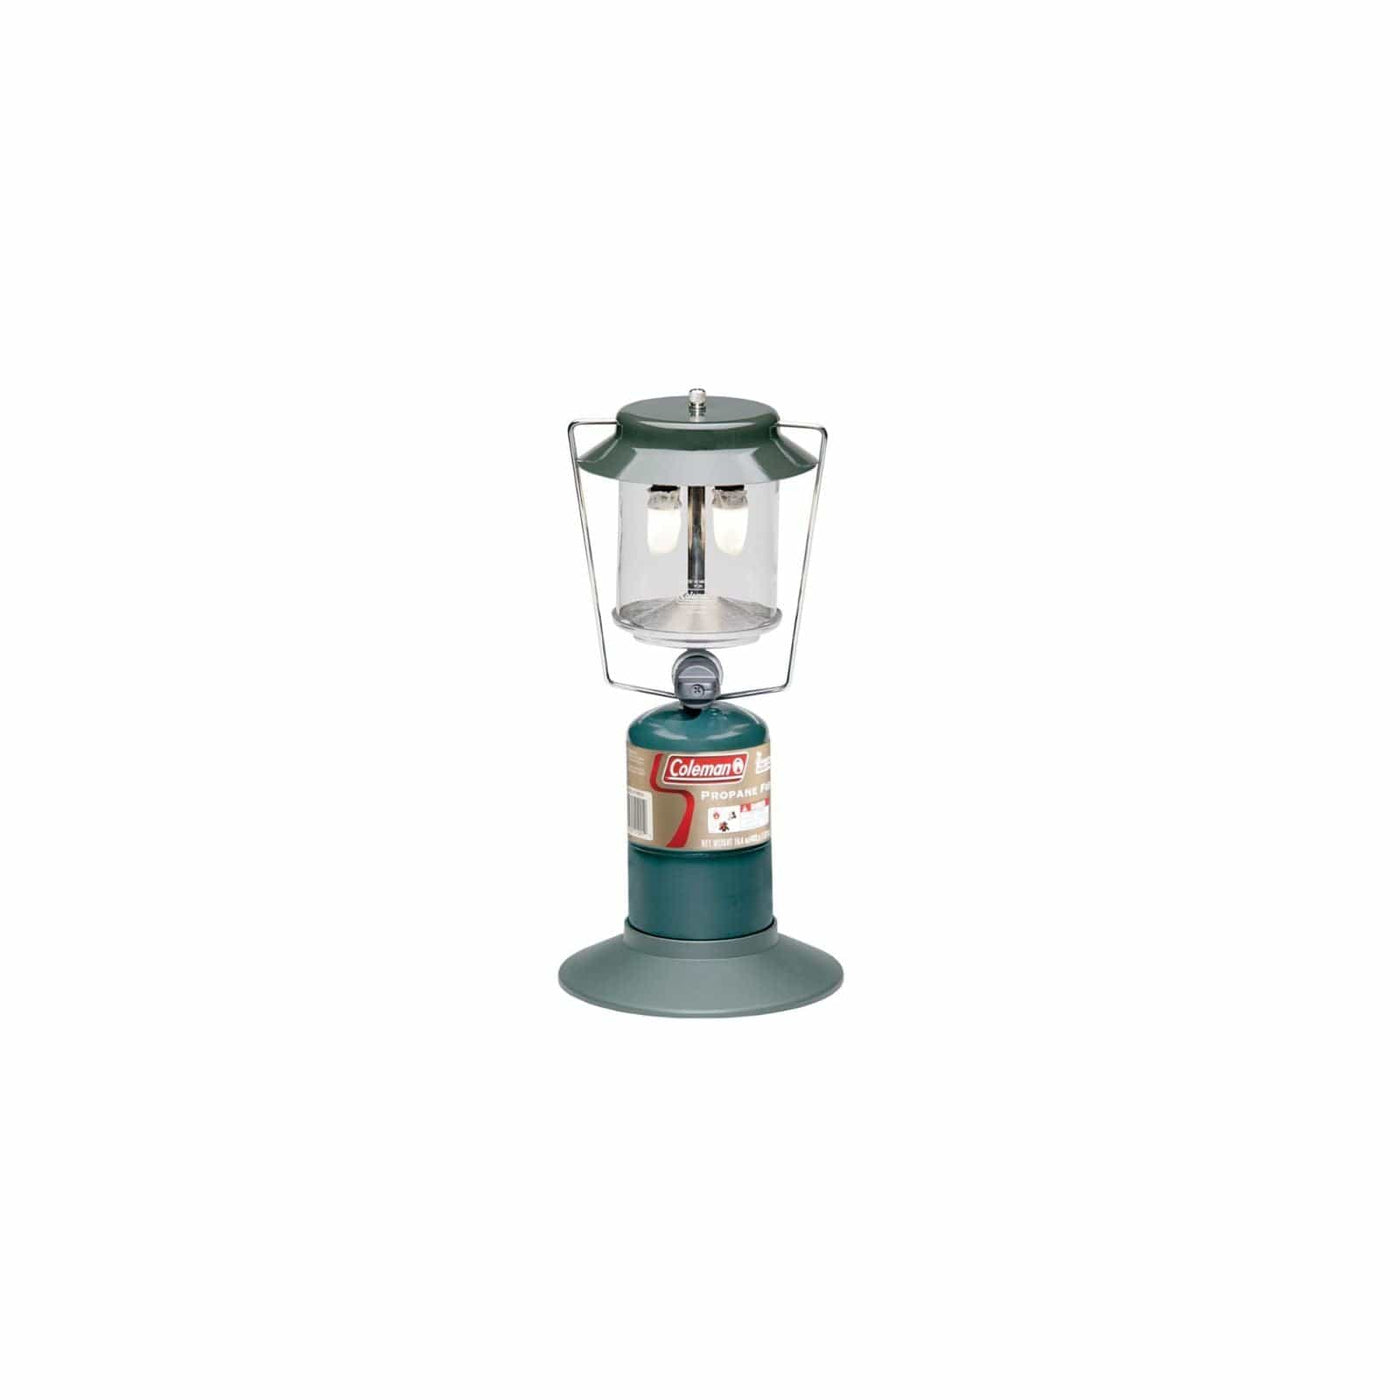 Coleman Coleman Lantern PPN 2 Mantle Basic C002 Camping And Outdoor